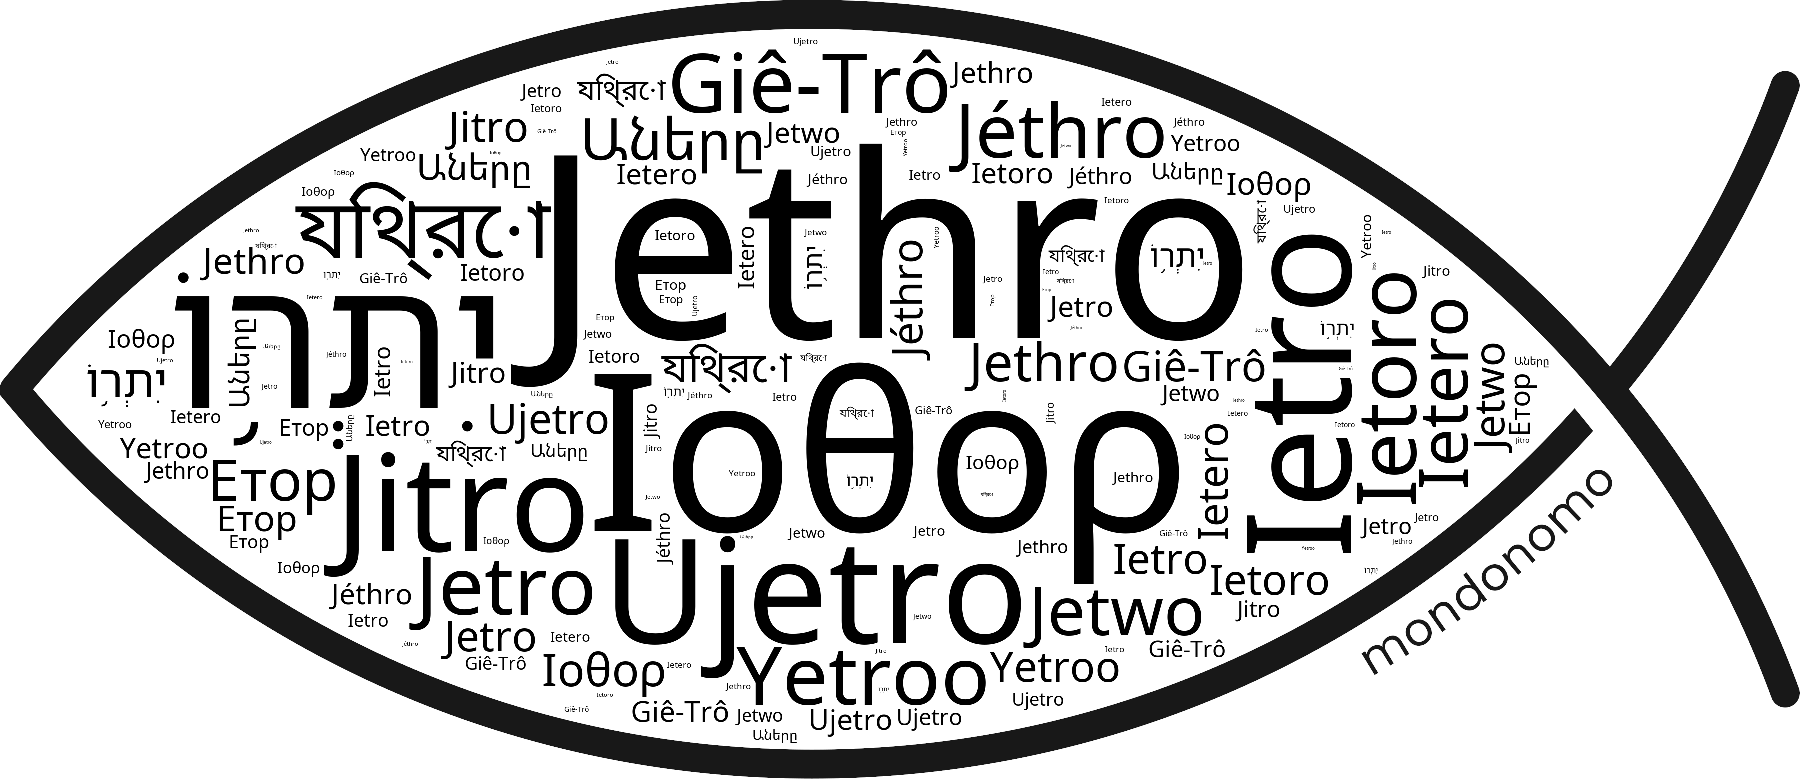 Name Jethro in the world's Bibles